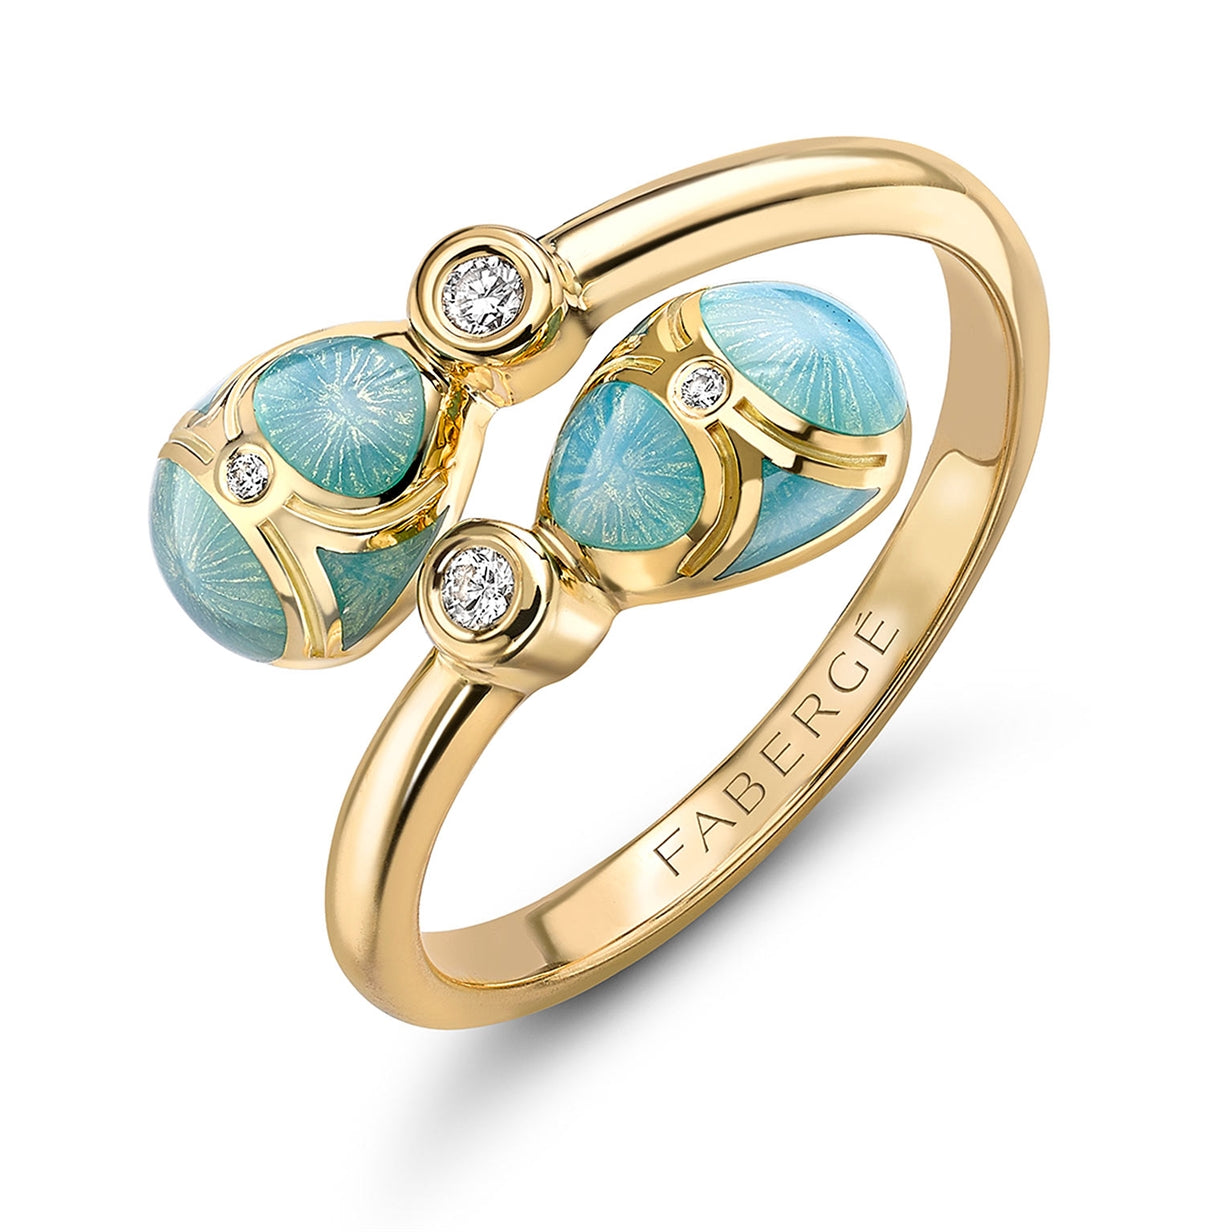 Heritage-Yellow-Gold-Diamond-&-Turquoise-Guilloché-Enamel-Crossover-Ring